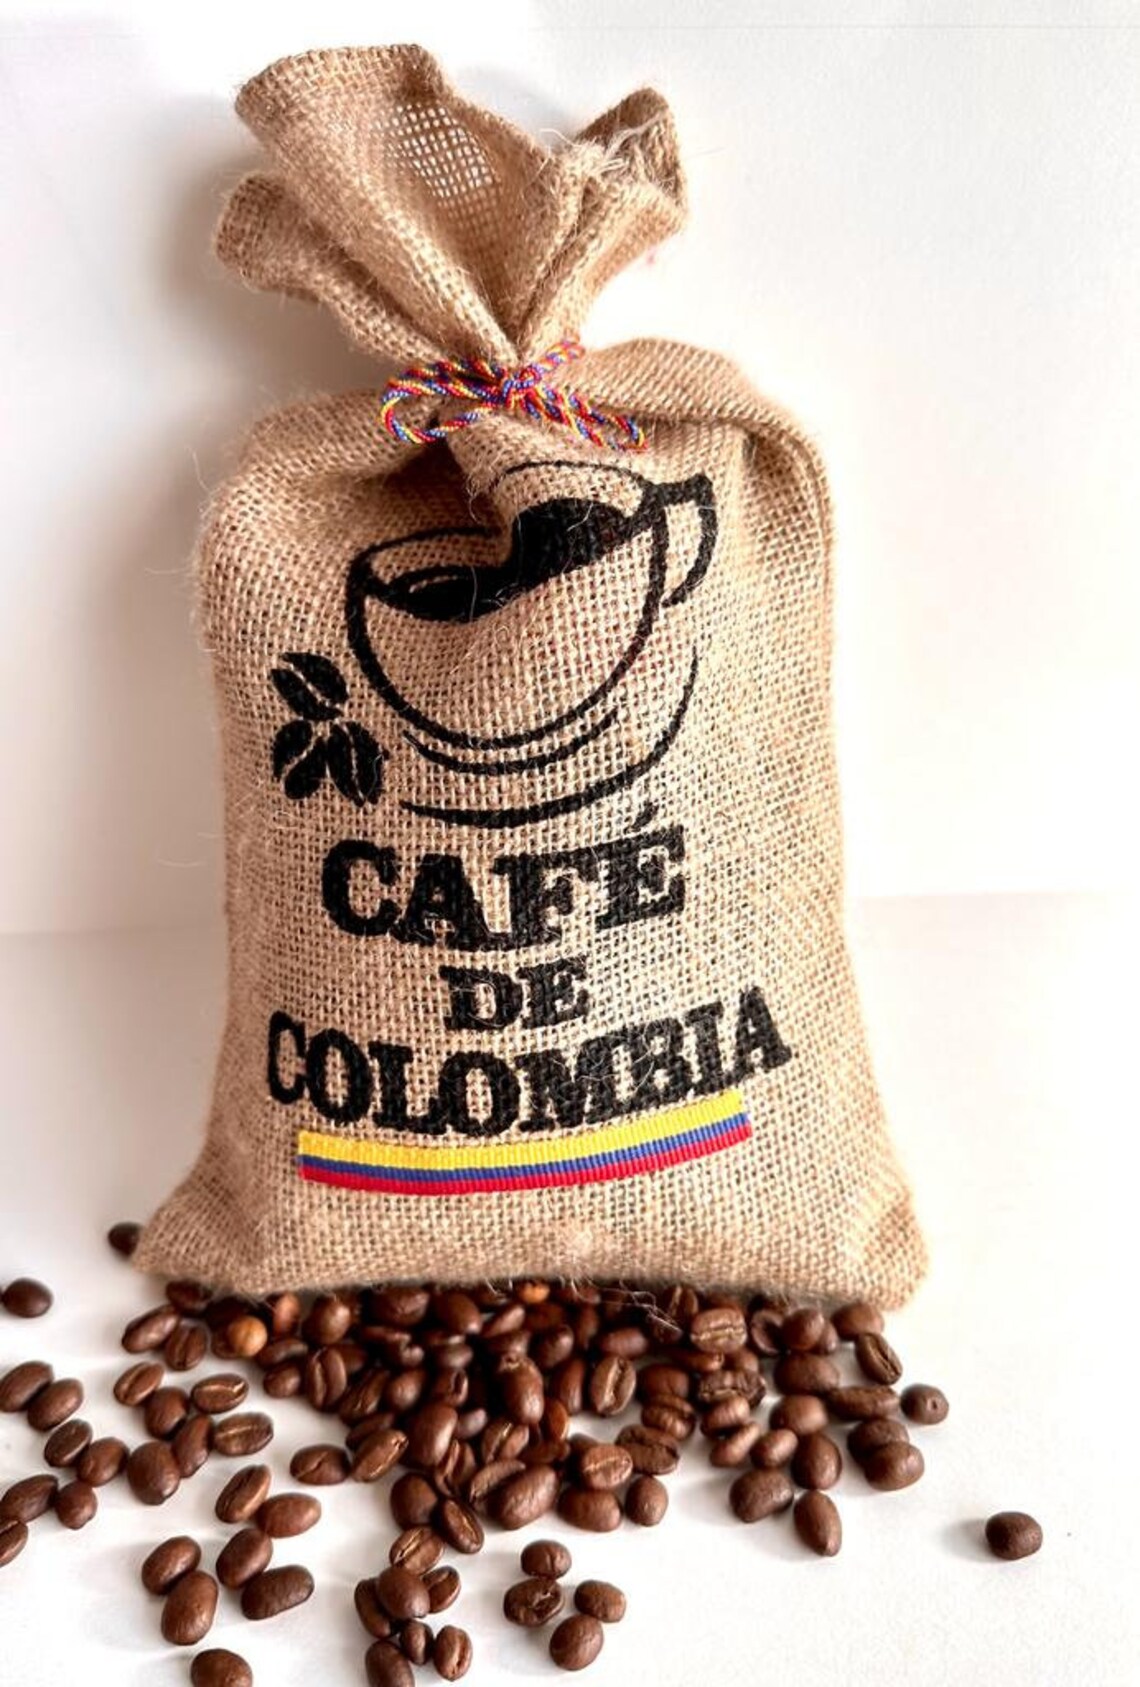 Coffee Gift Set from Colombia. Juan Valdez. 4 Samplers: 2 Ground Coffee Flavors